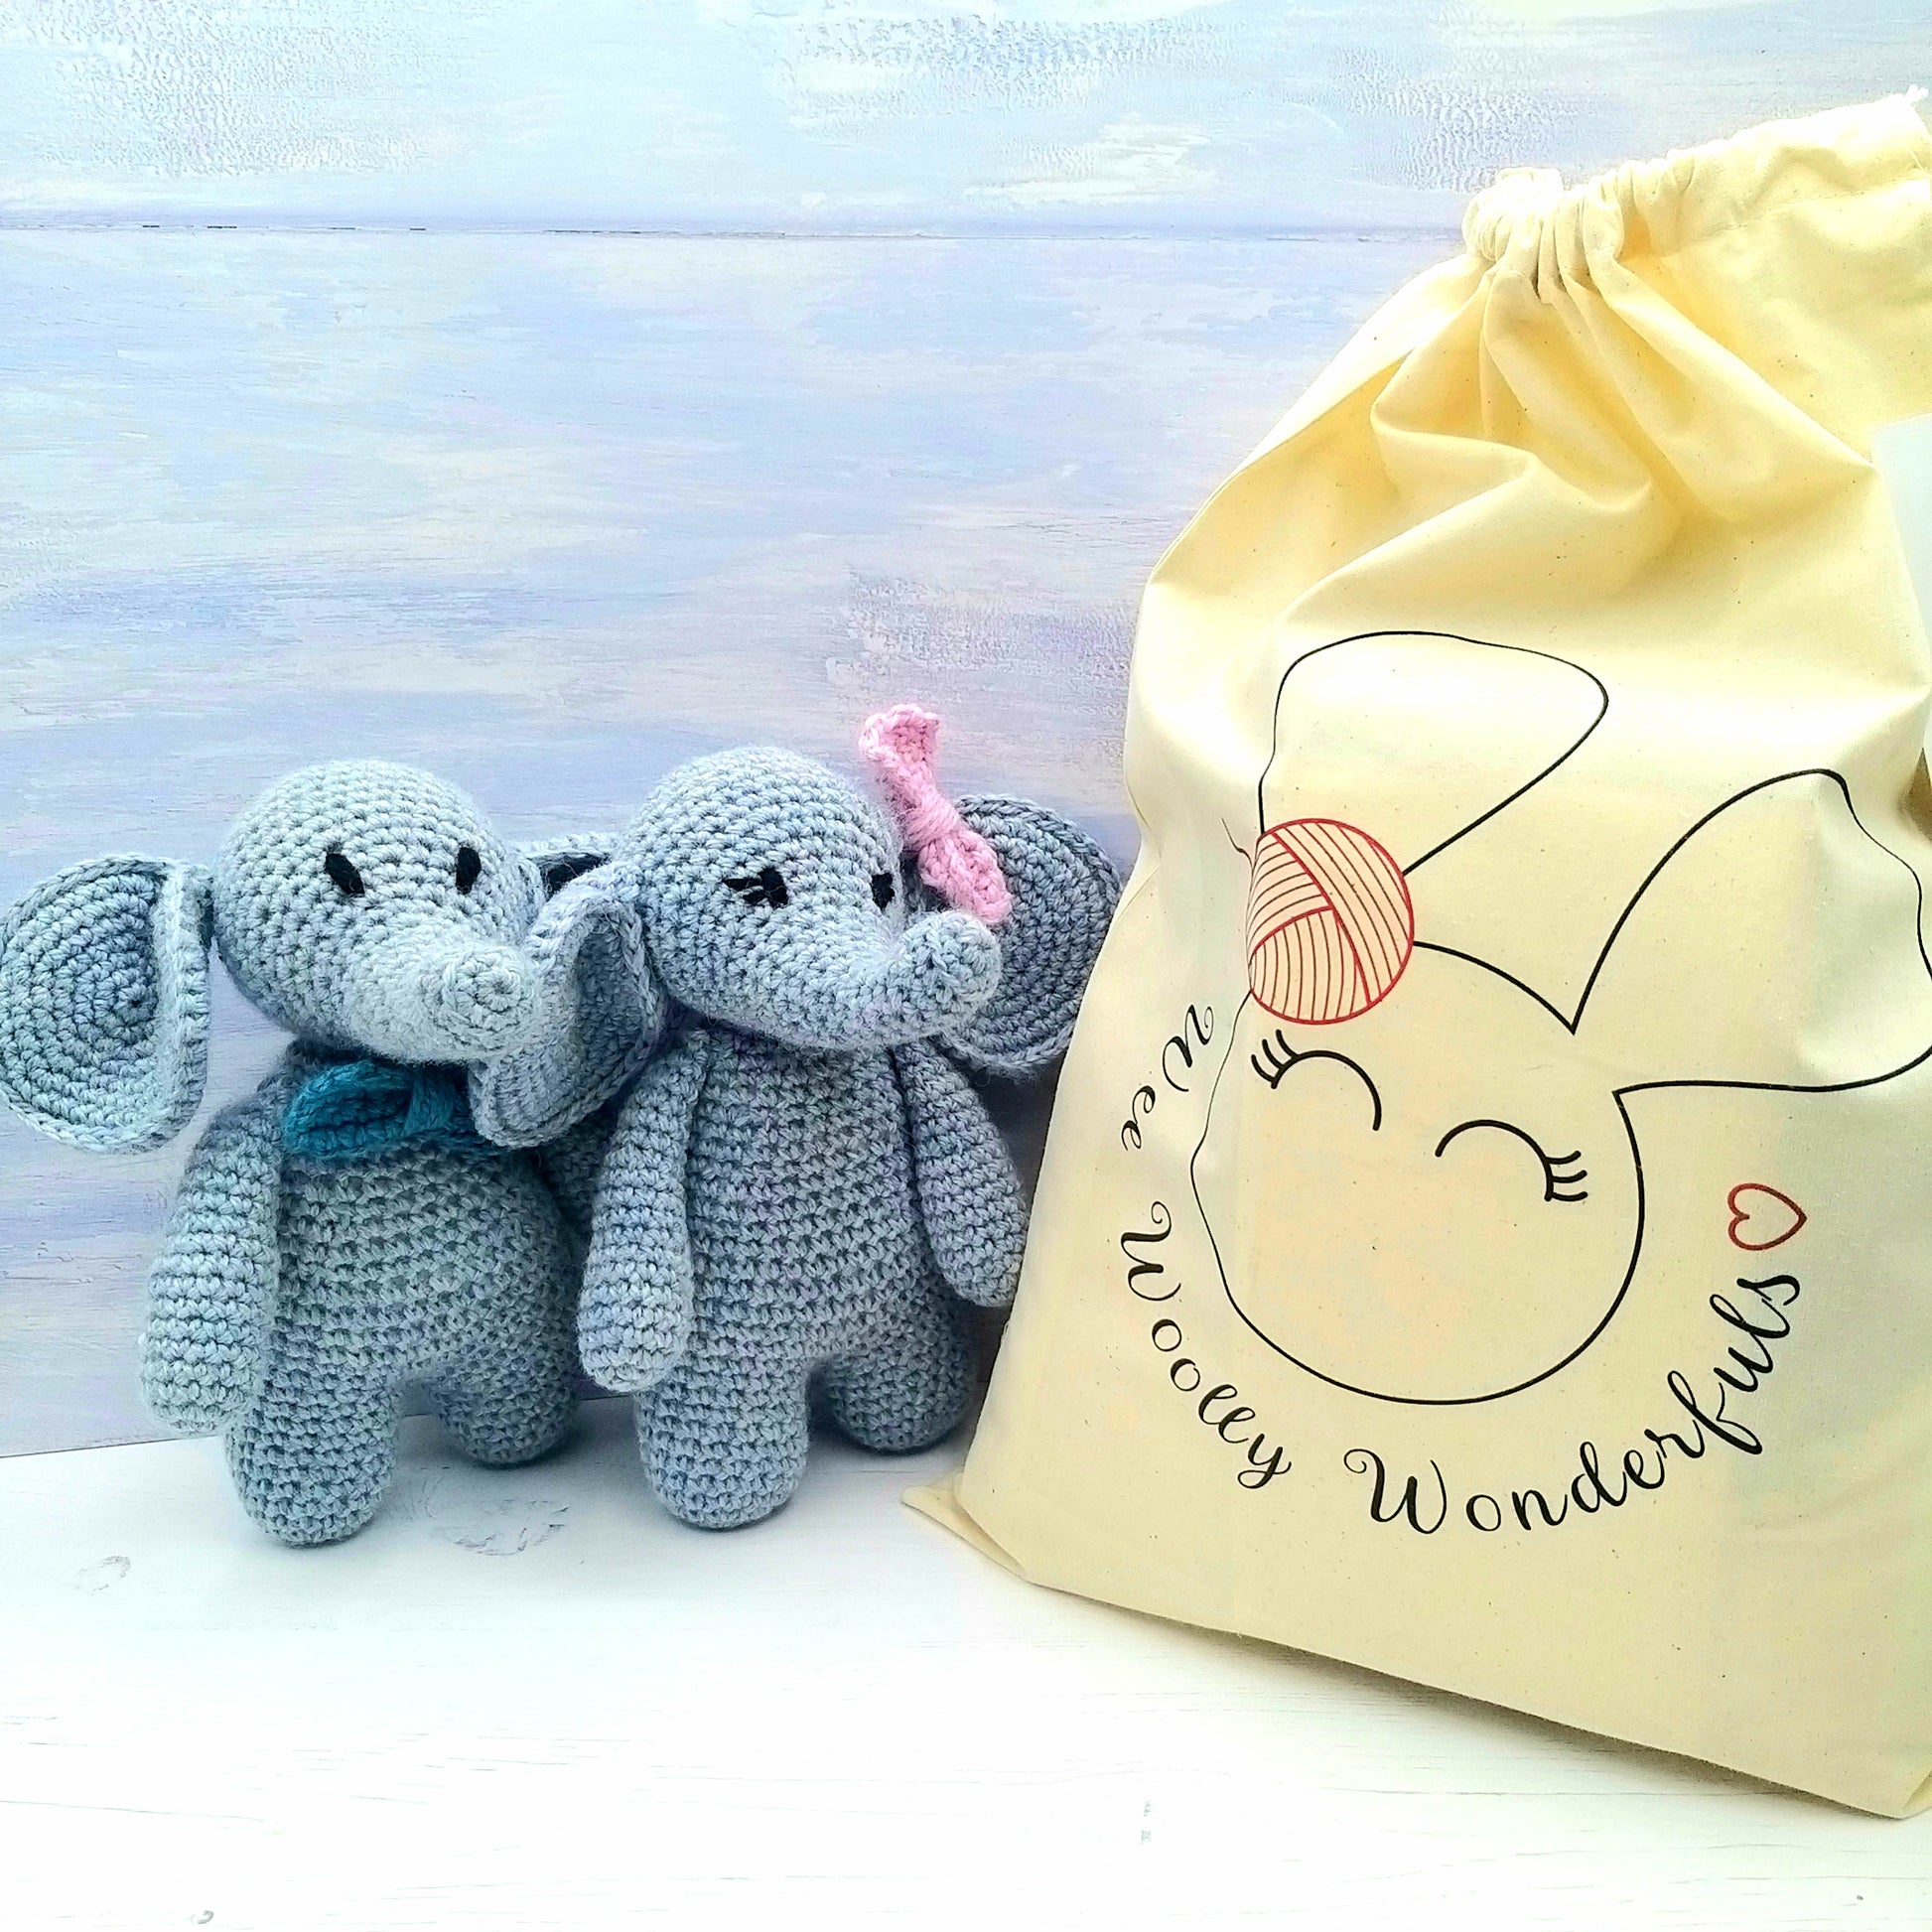 Toy Elephants with Crochet Project Bag